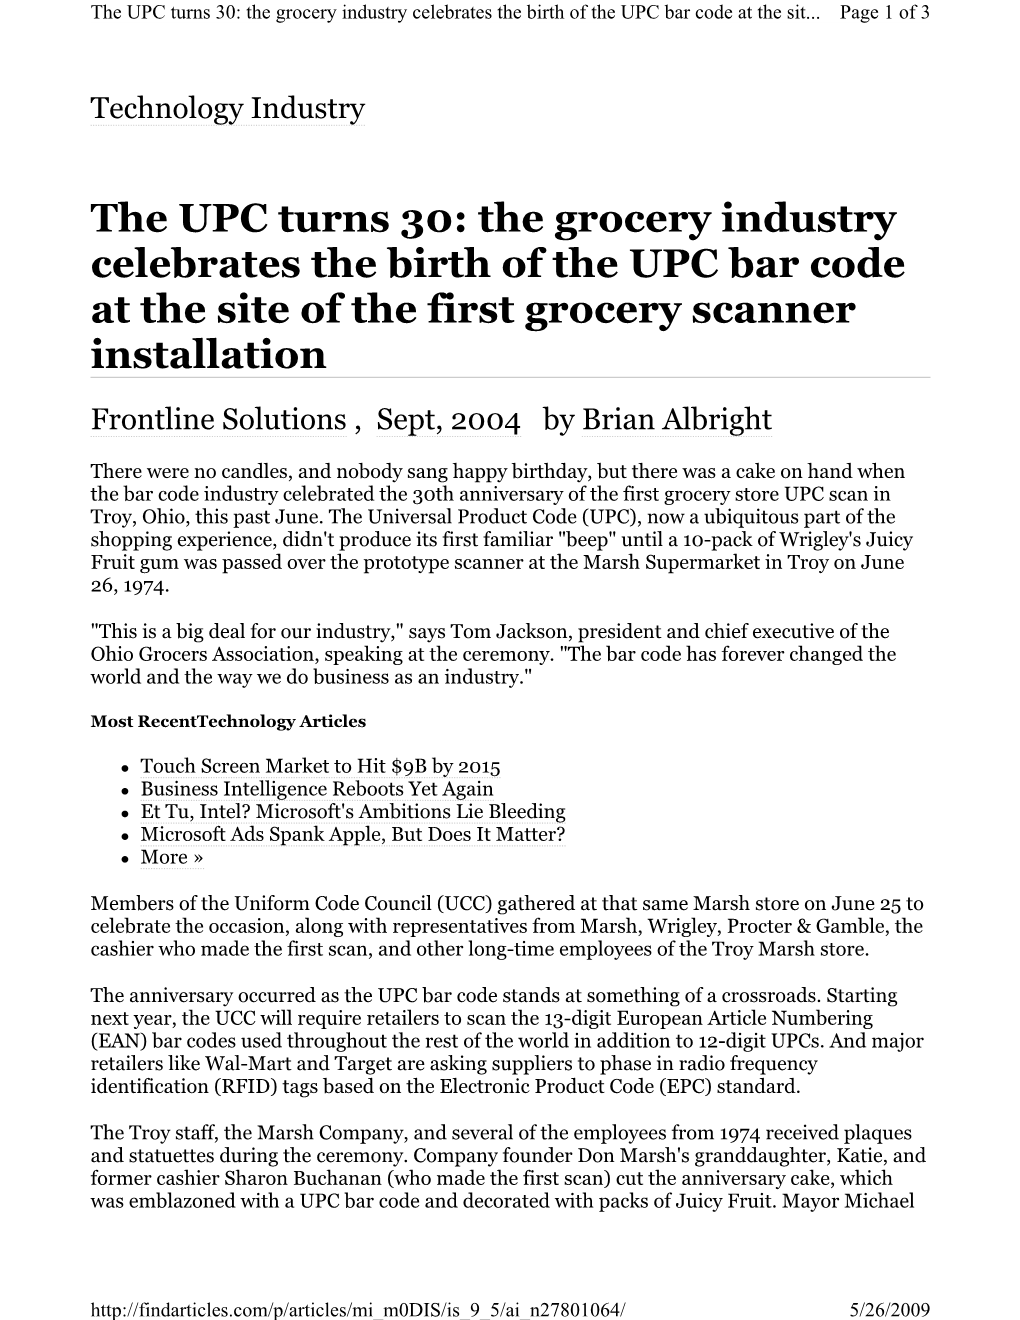 The UPC Turns 30: the Grocery Industry Celebrates the Birth of the UPC Bar Code at the Site of the First Grocery Scanner Install